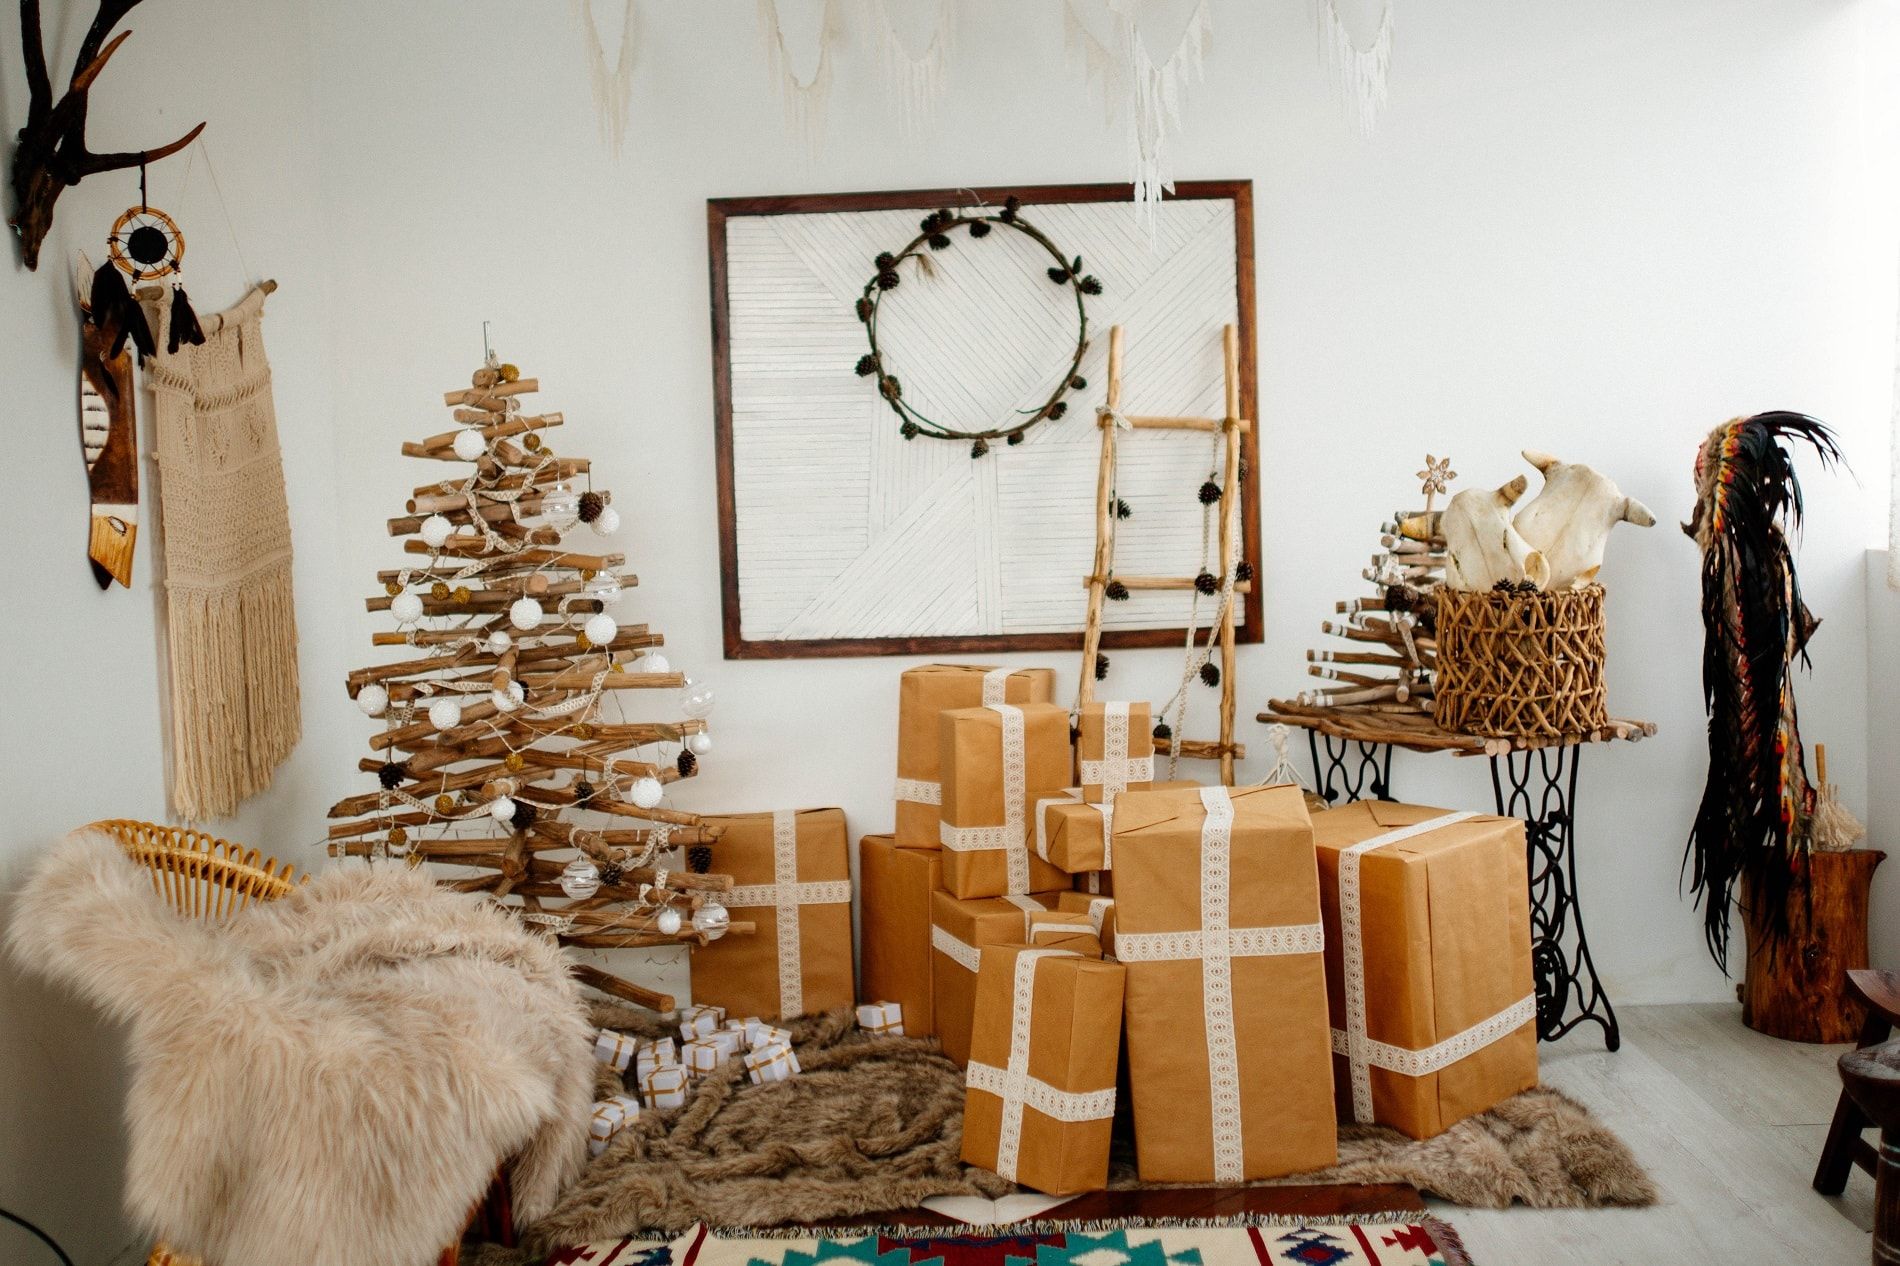 5 Shipping and Logistics Mistakes to Avoid During the Holidays